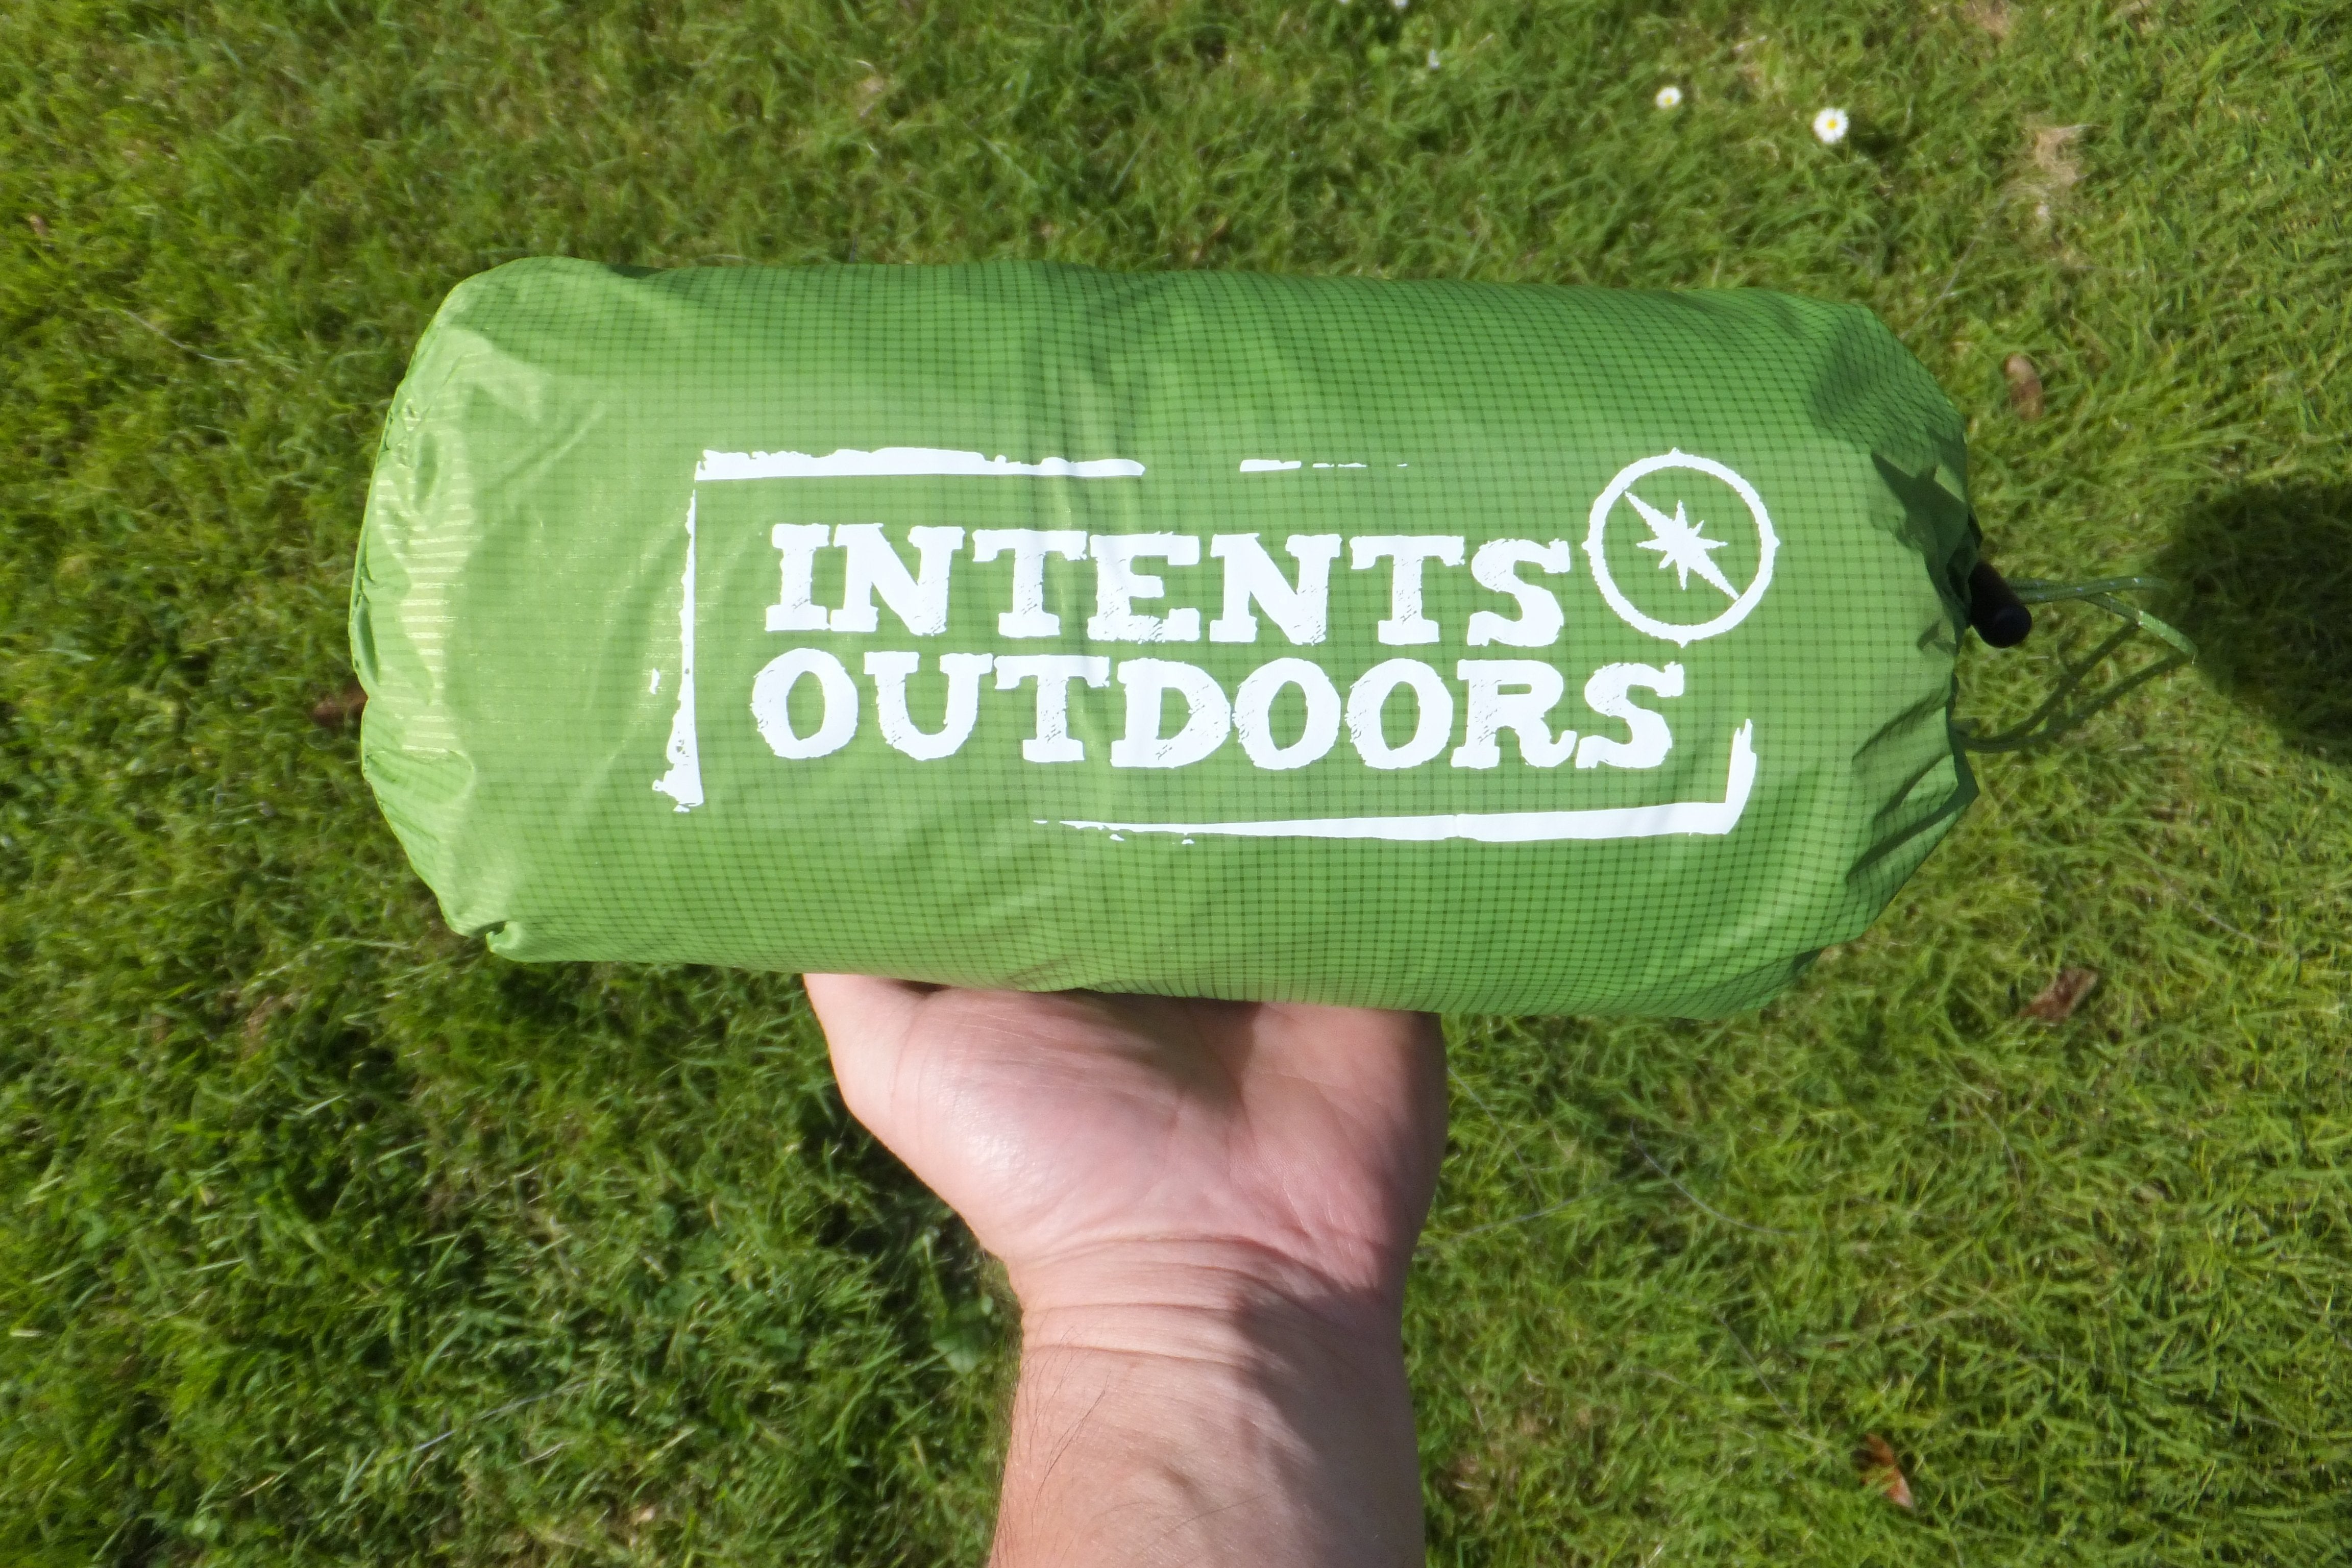 Intents Outdoors ultralight tents have a small packed size